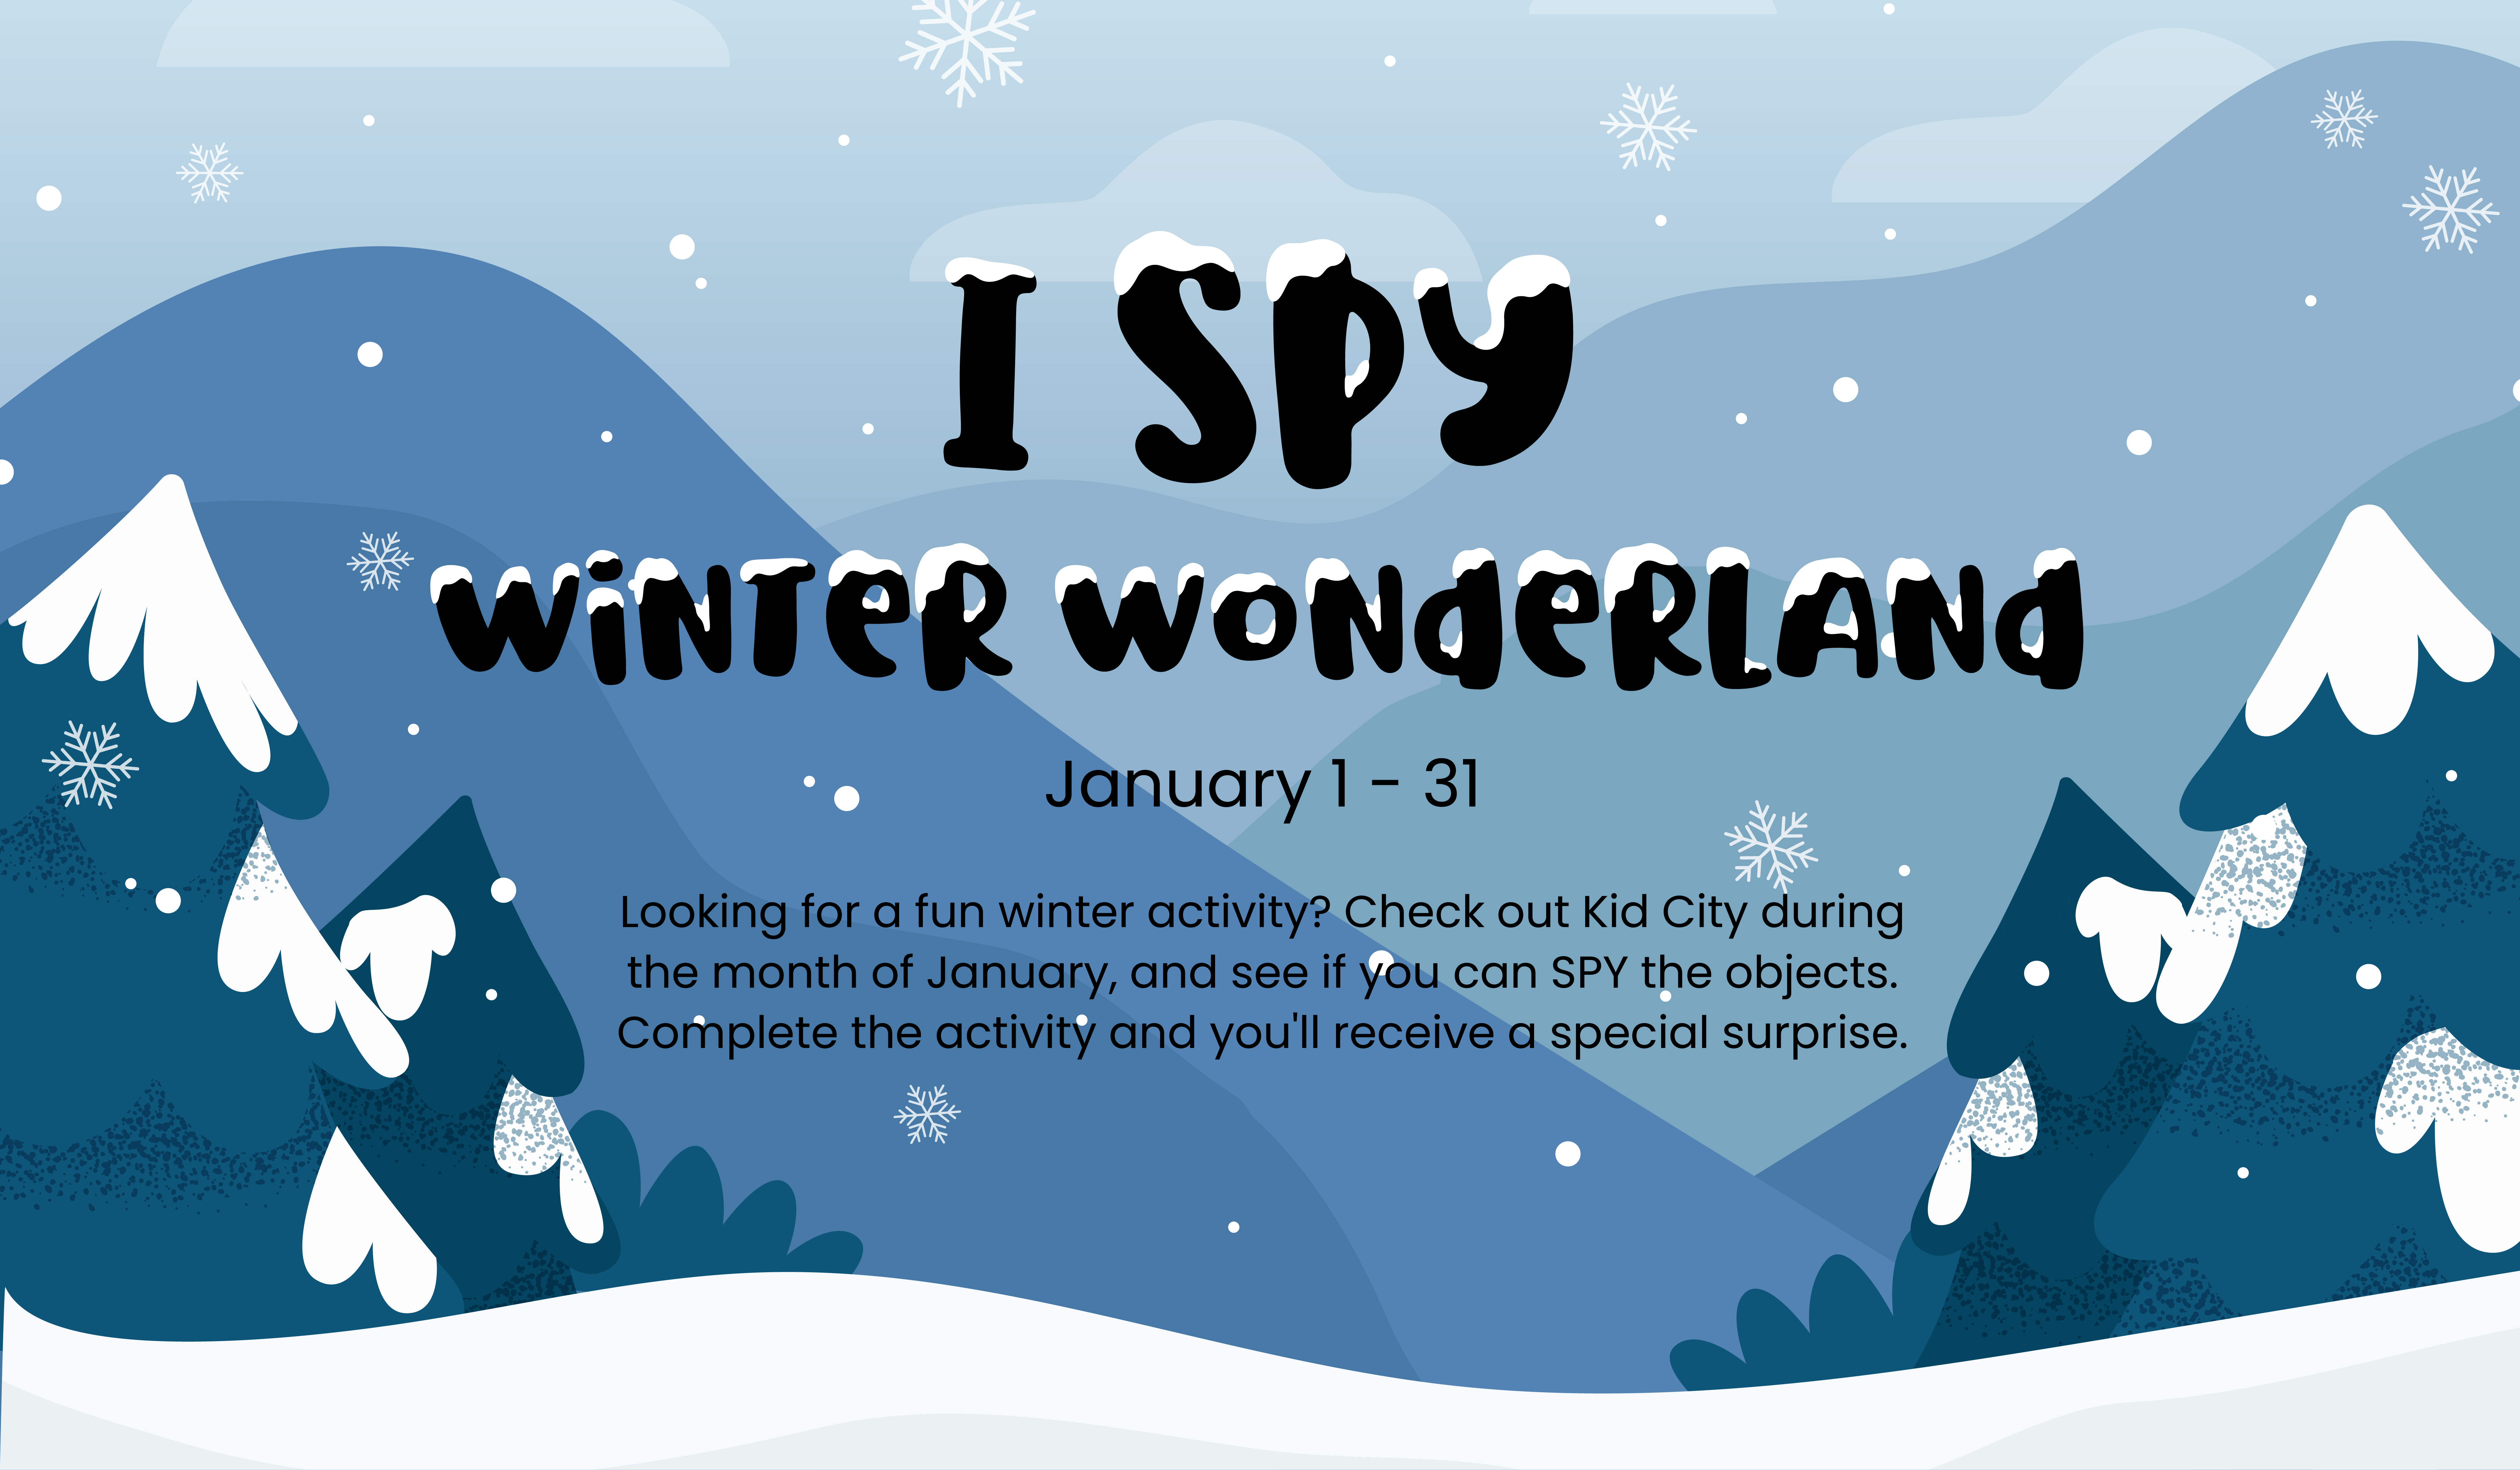 Can you spy all the winter objects in Kid City?